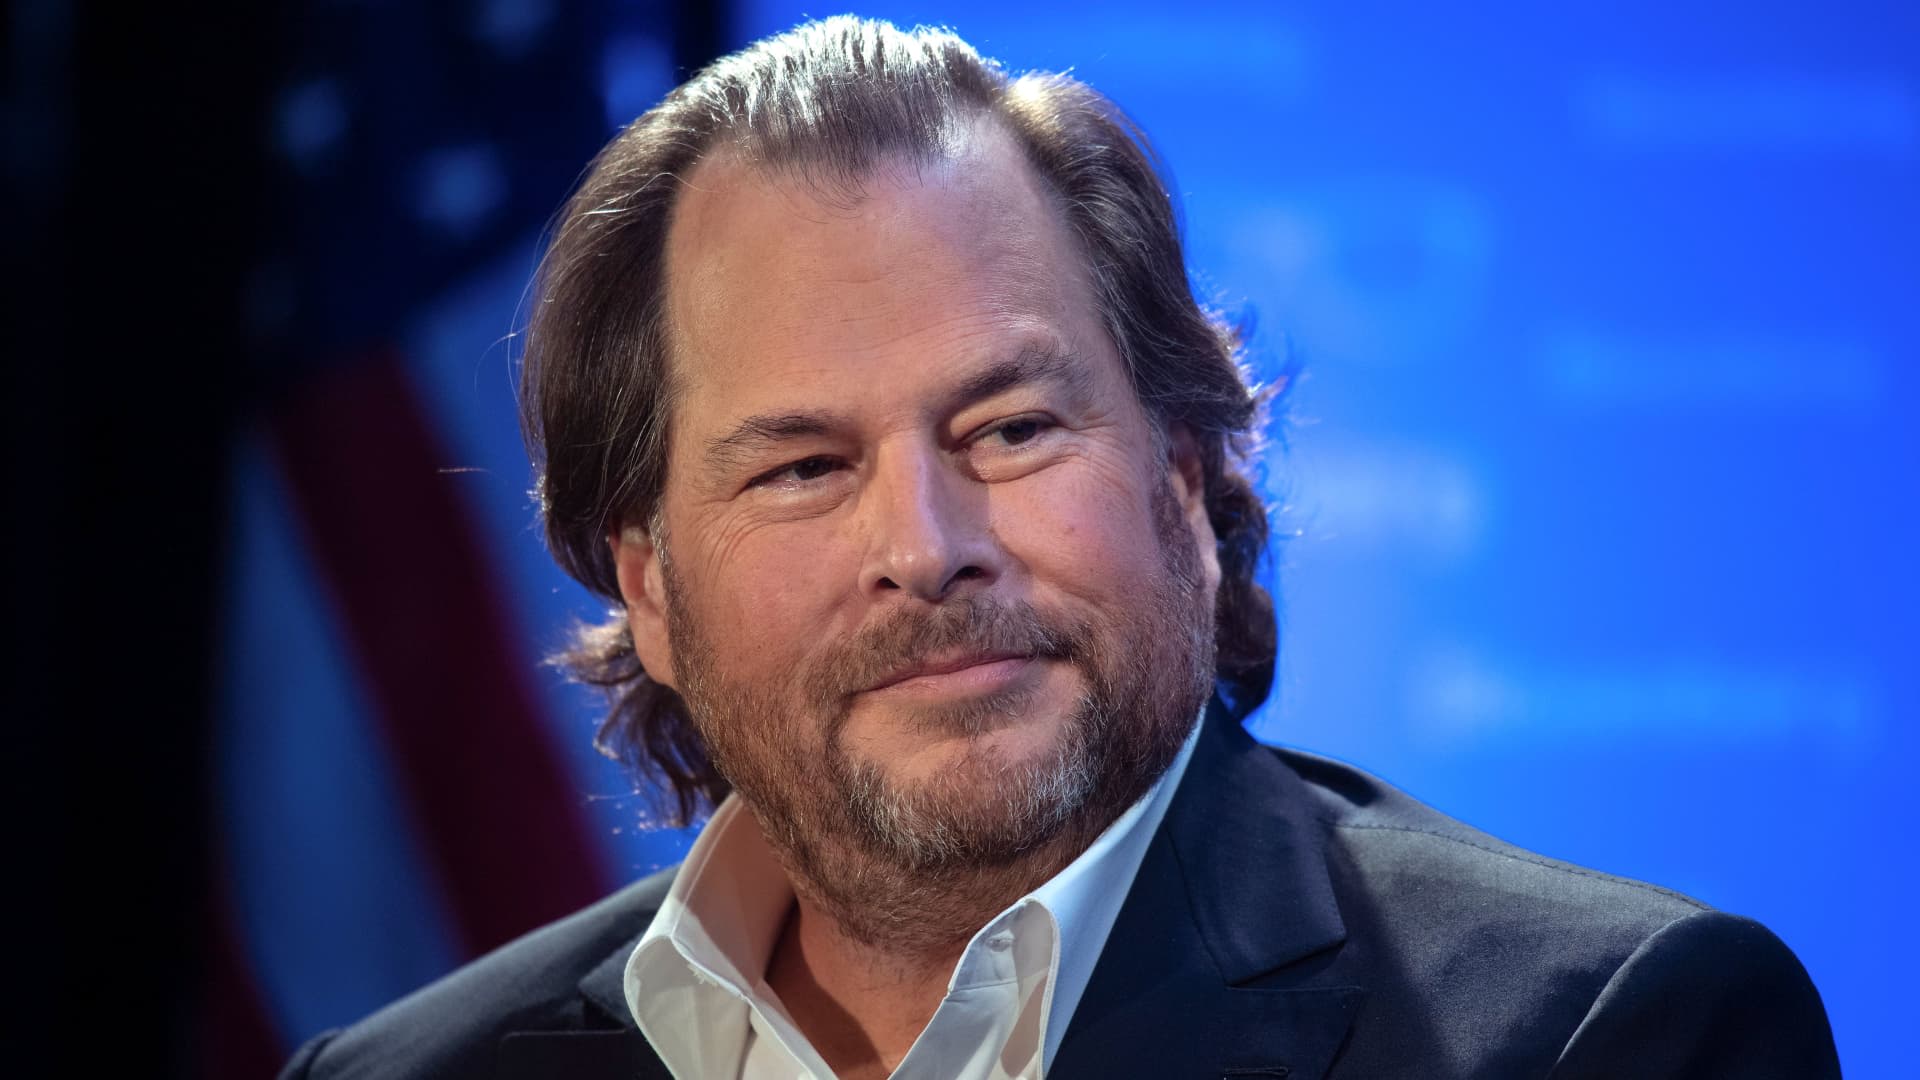 After revenue miss, Salesforce CEO details the 'measured' buying environment for enterprise software companies